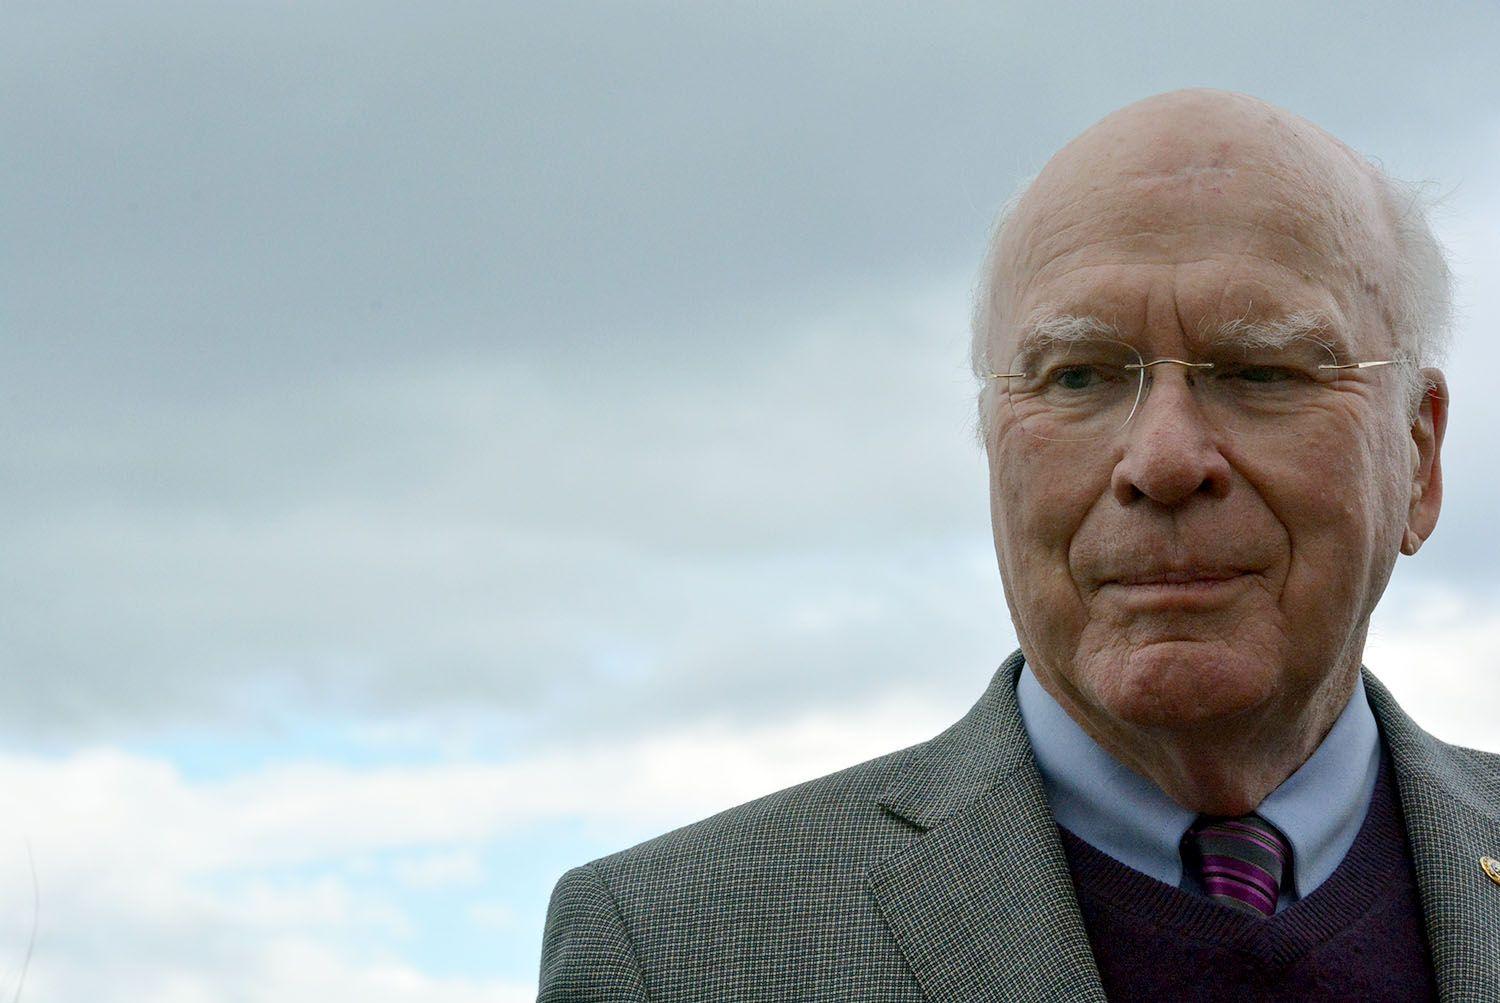 Patrick Leahy standing outside with clouds in the background